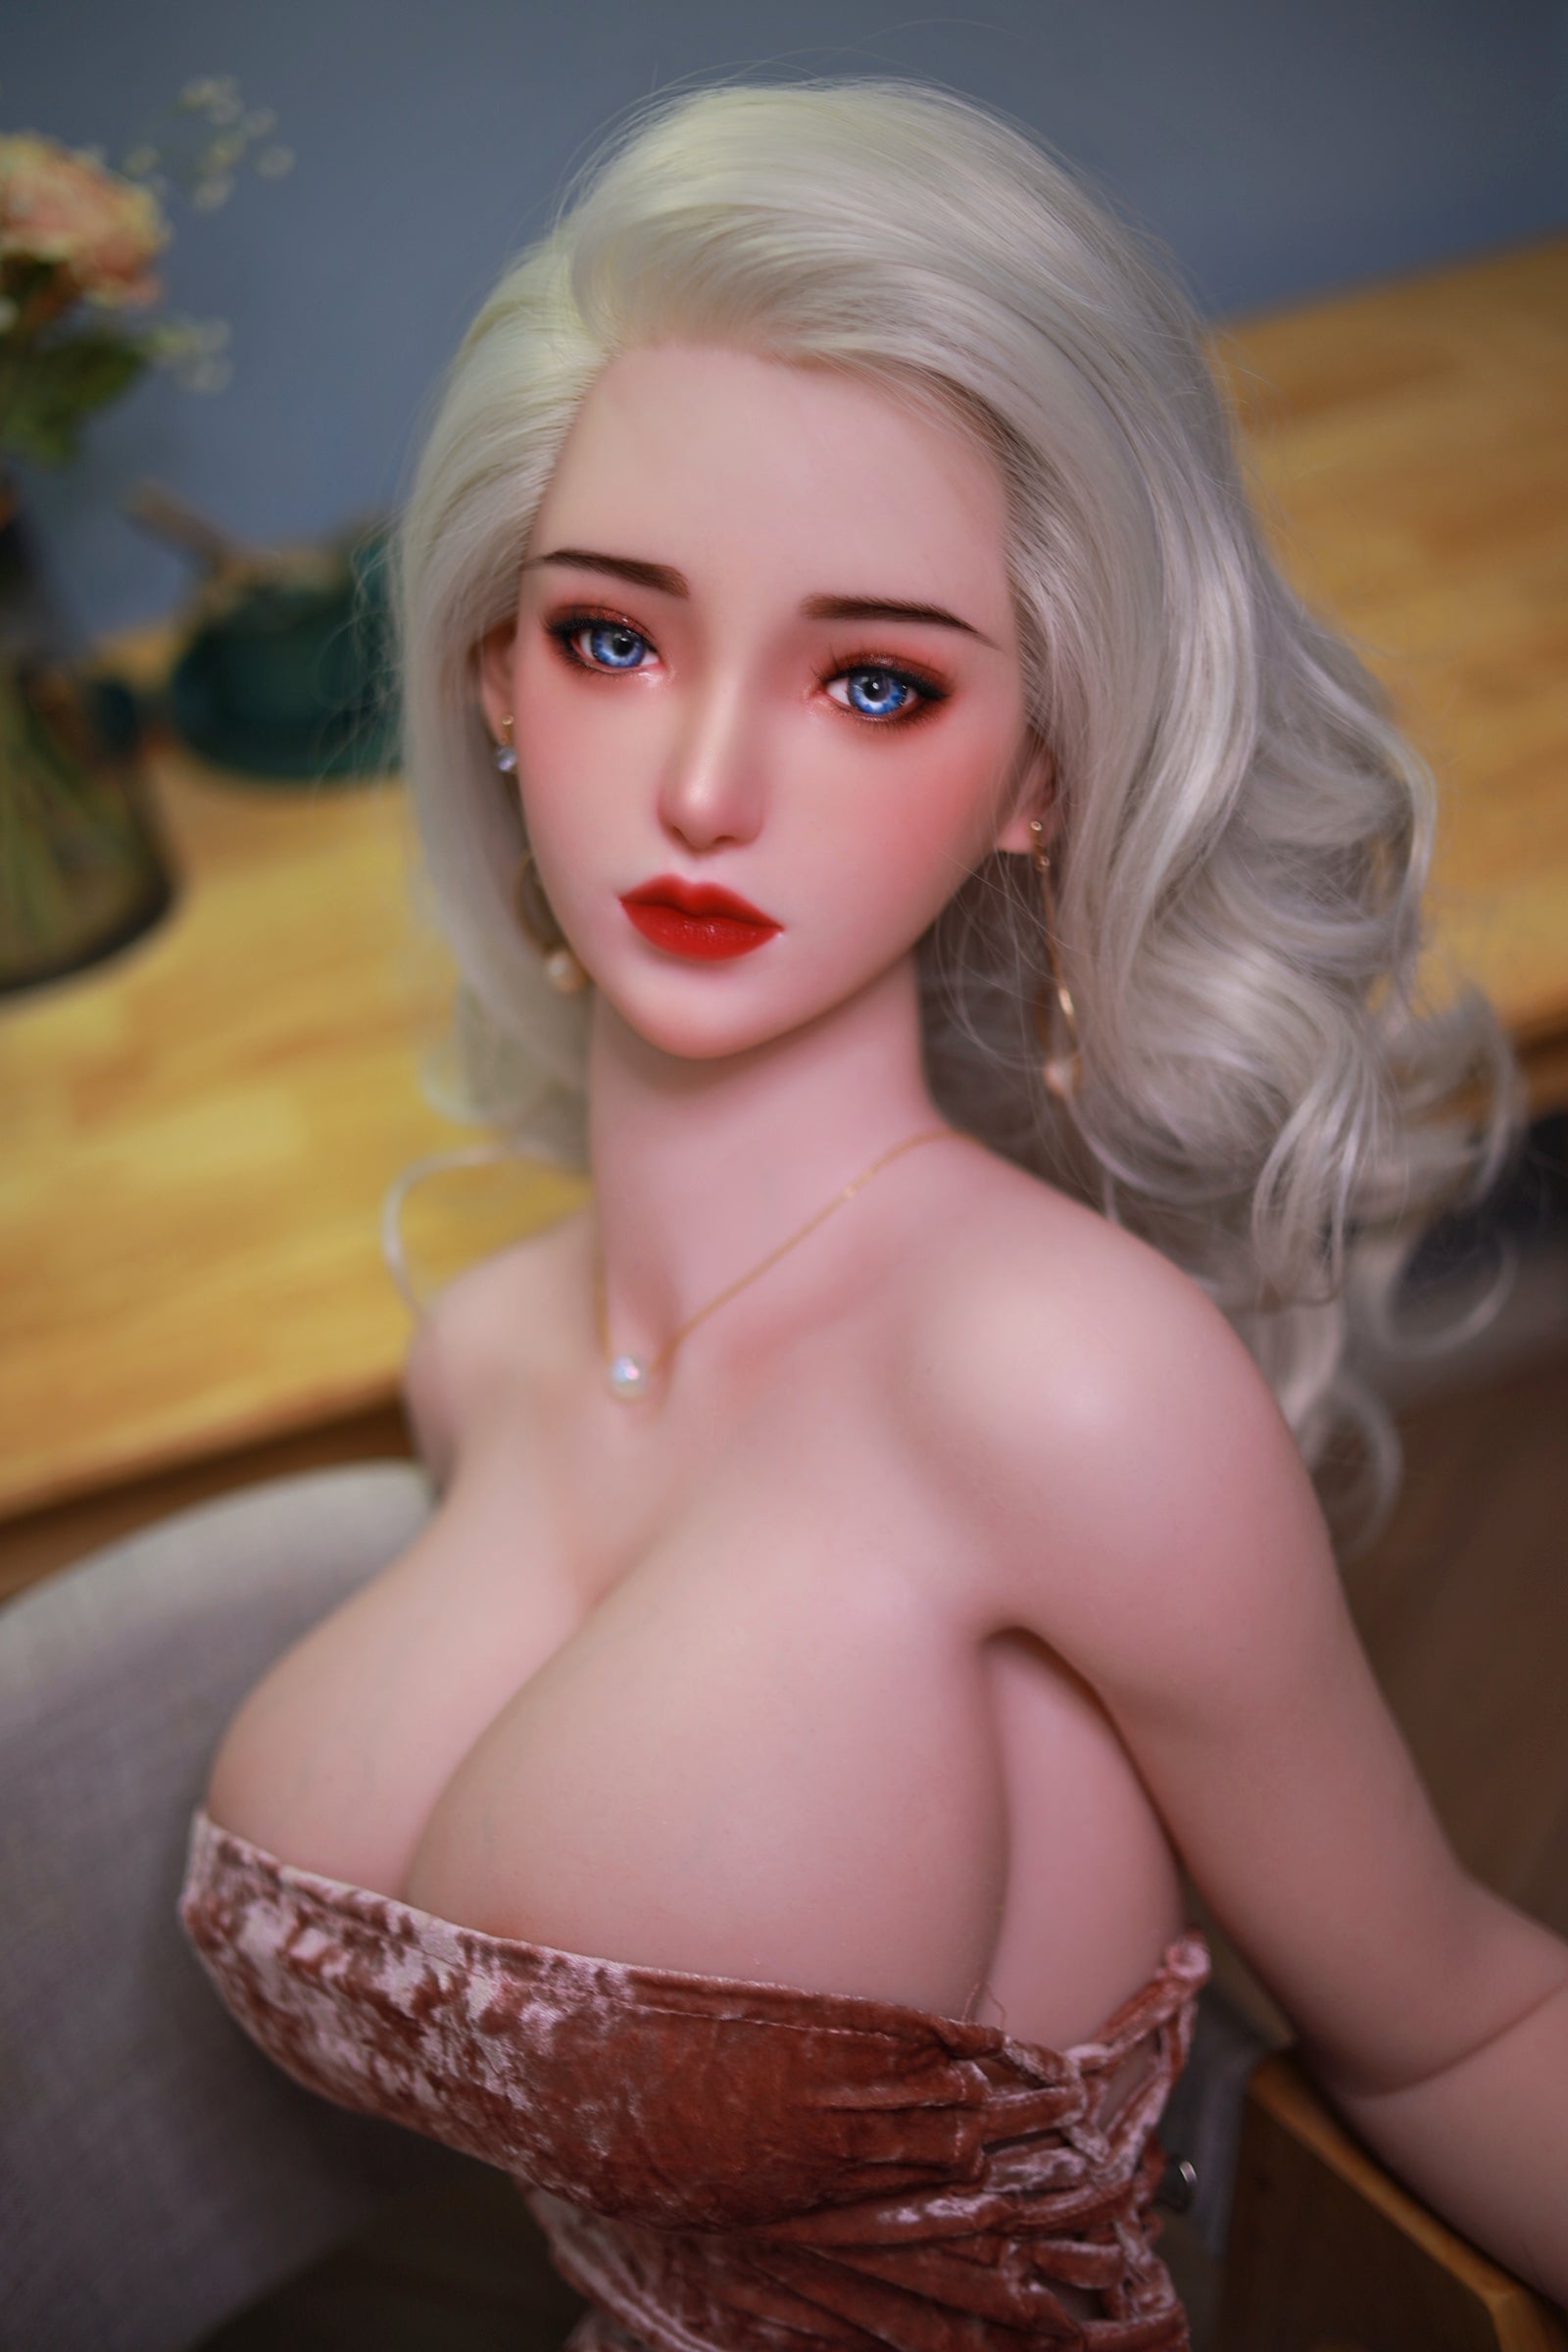 JY Doll 161 cm Silicone - Xing he | Buy Sex Dolls at DOLLS ACTUALLY